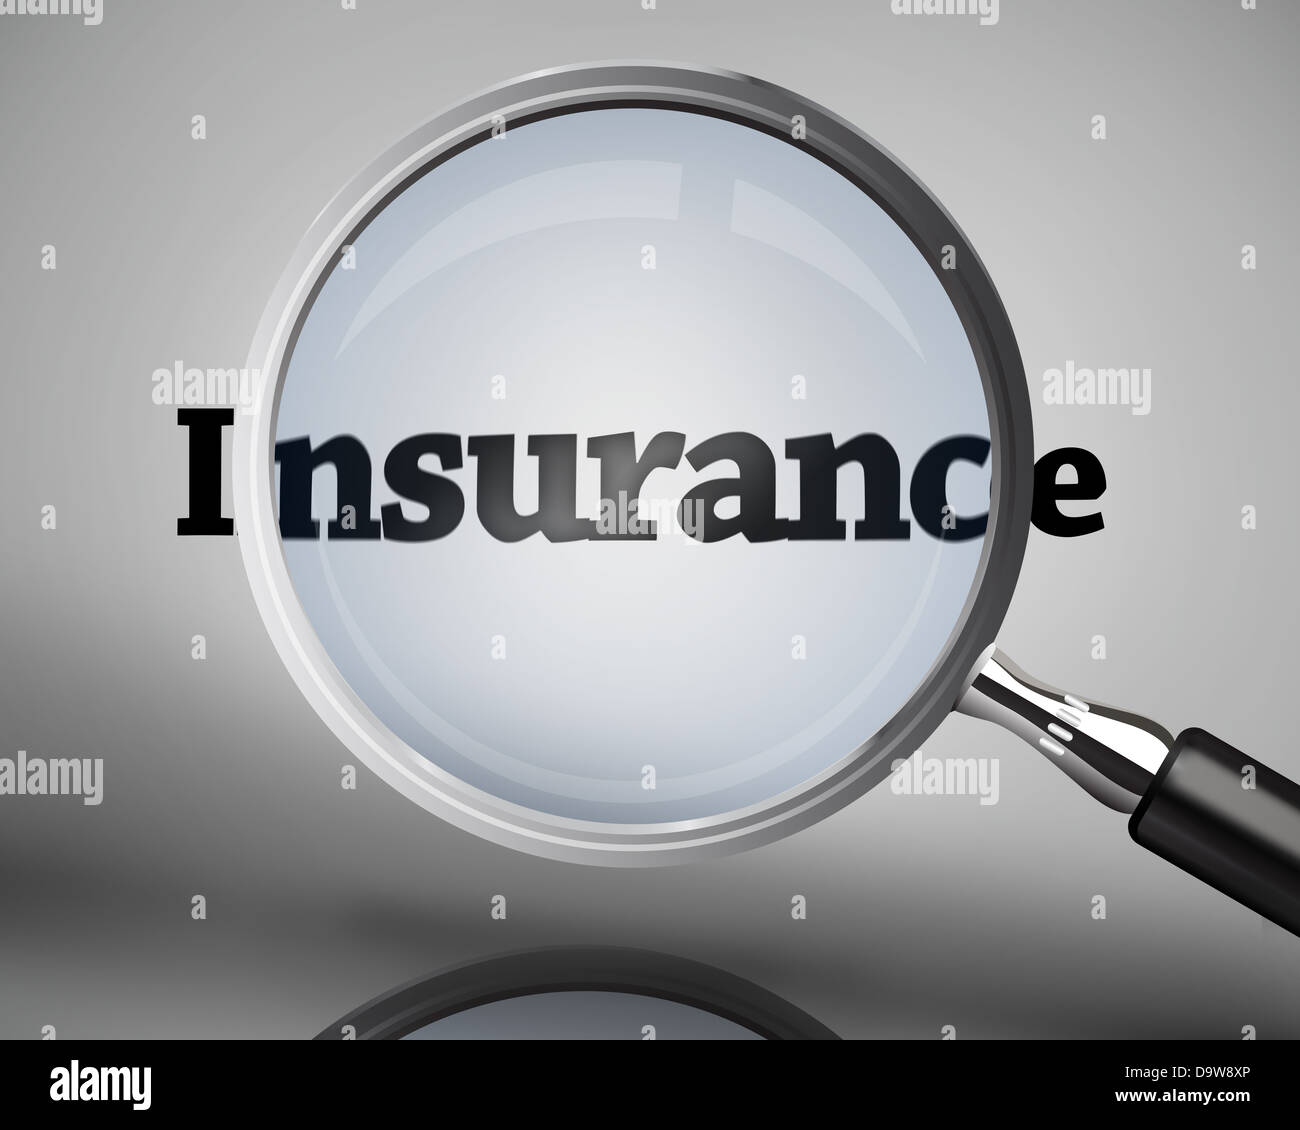 Magnifying glass showing insurance word Stock Photo